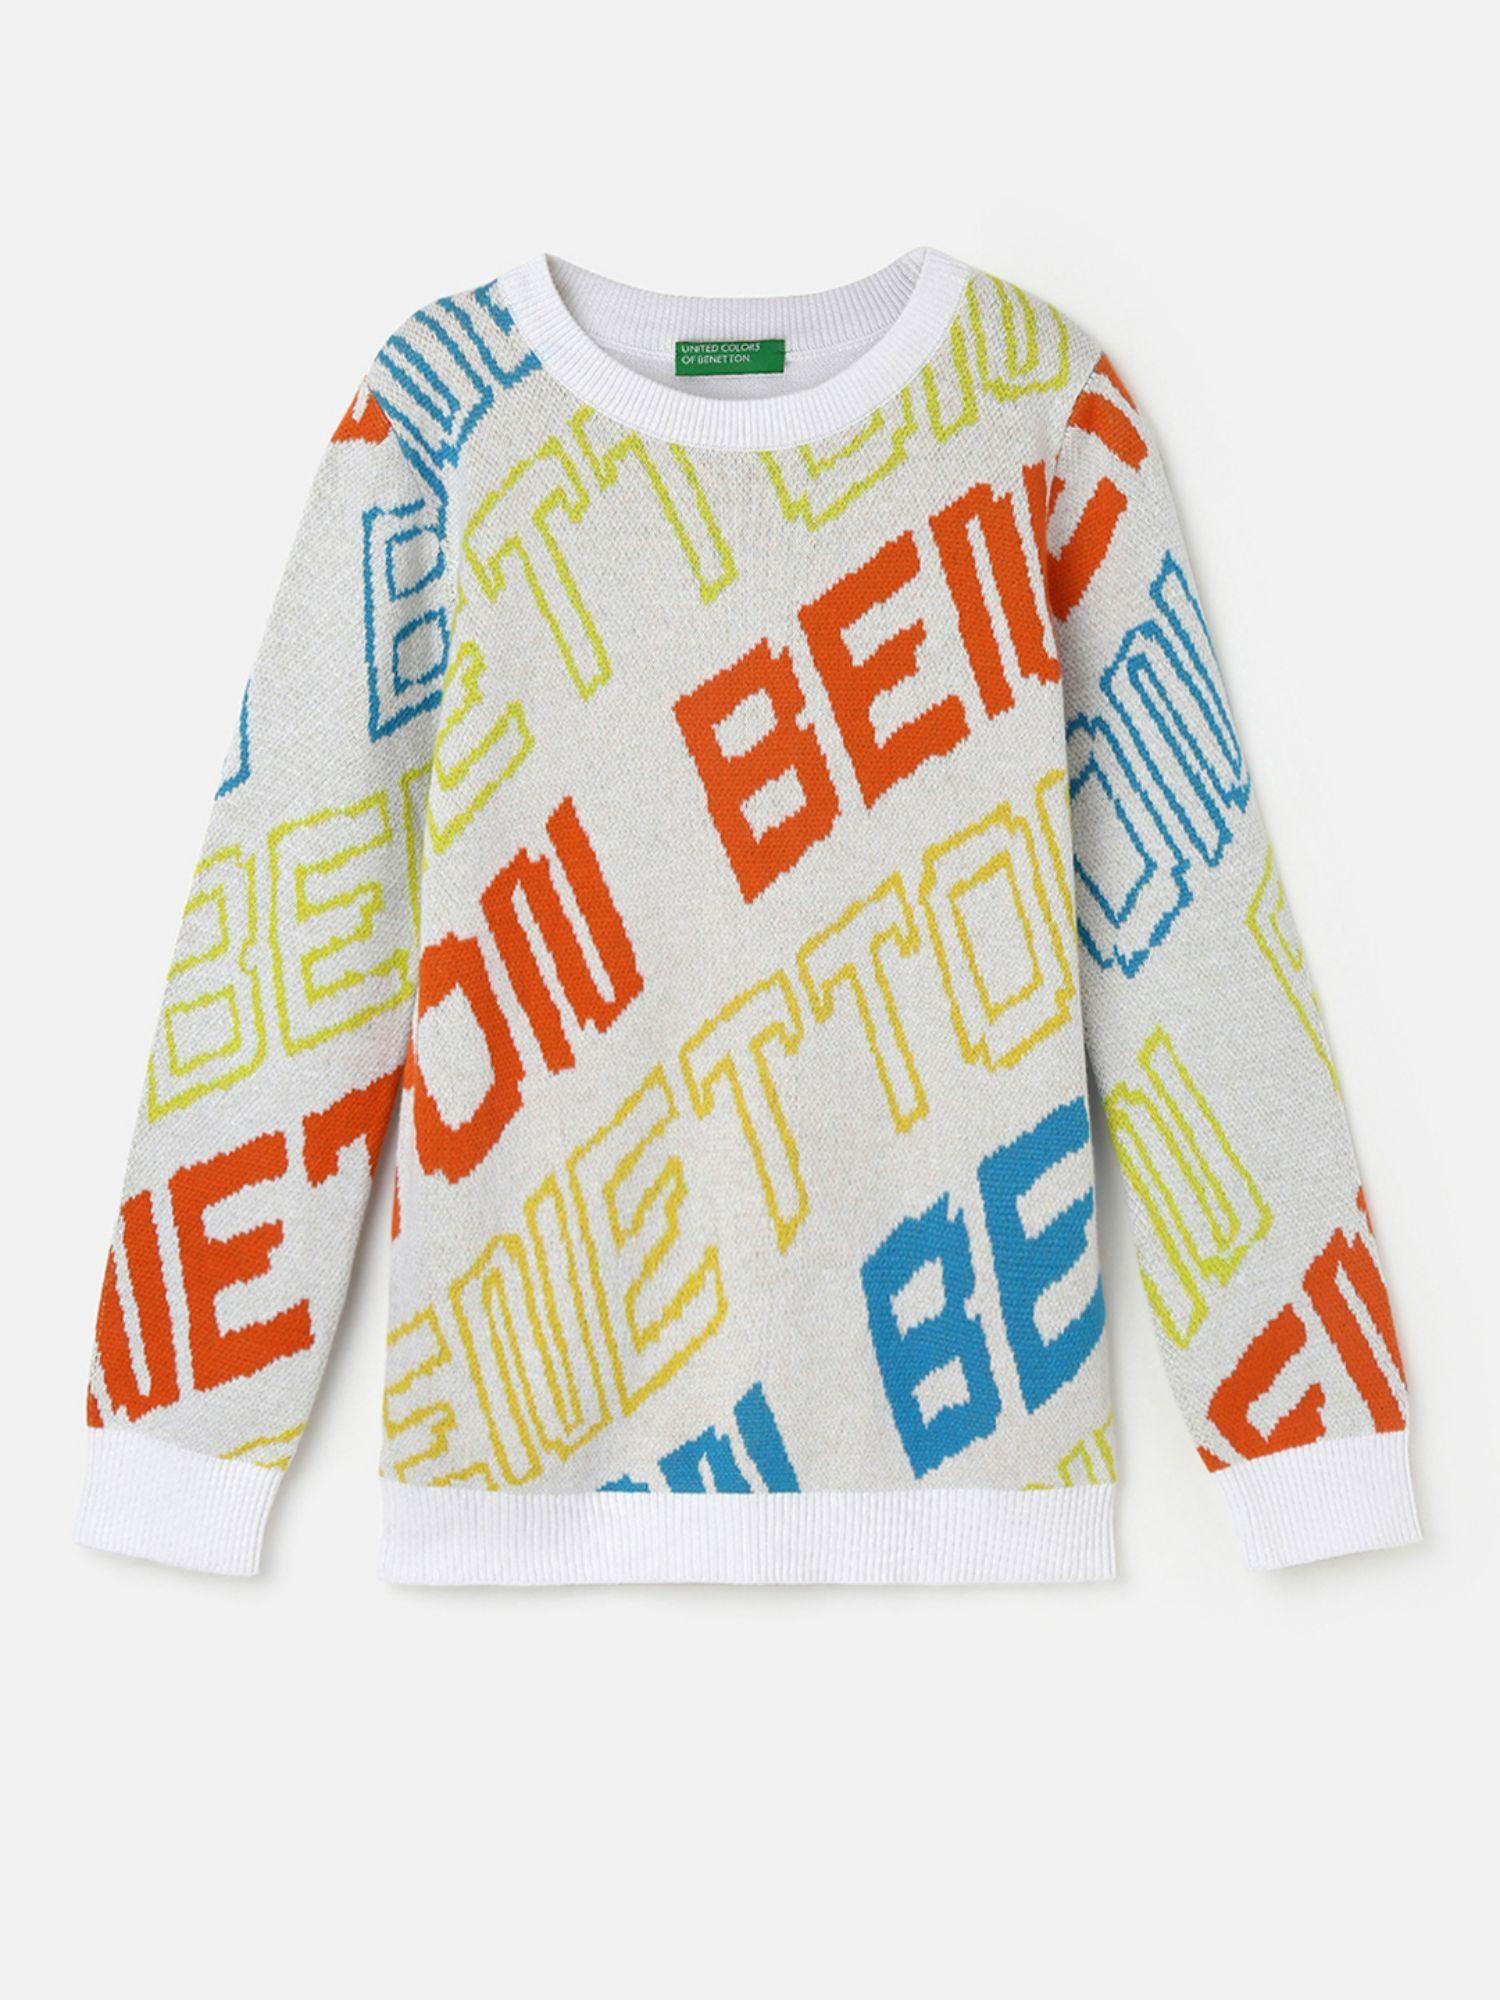 boys regular fit crew neck patterned sweaters